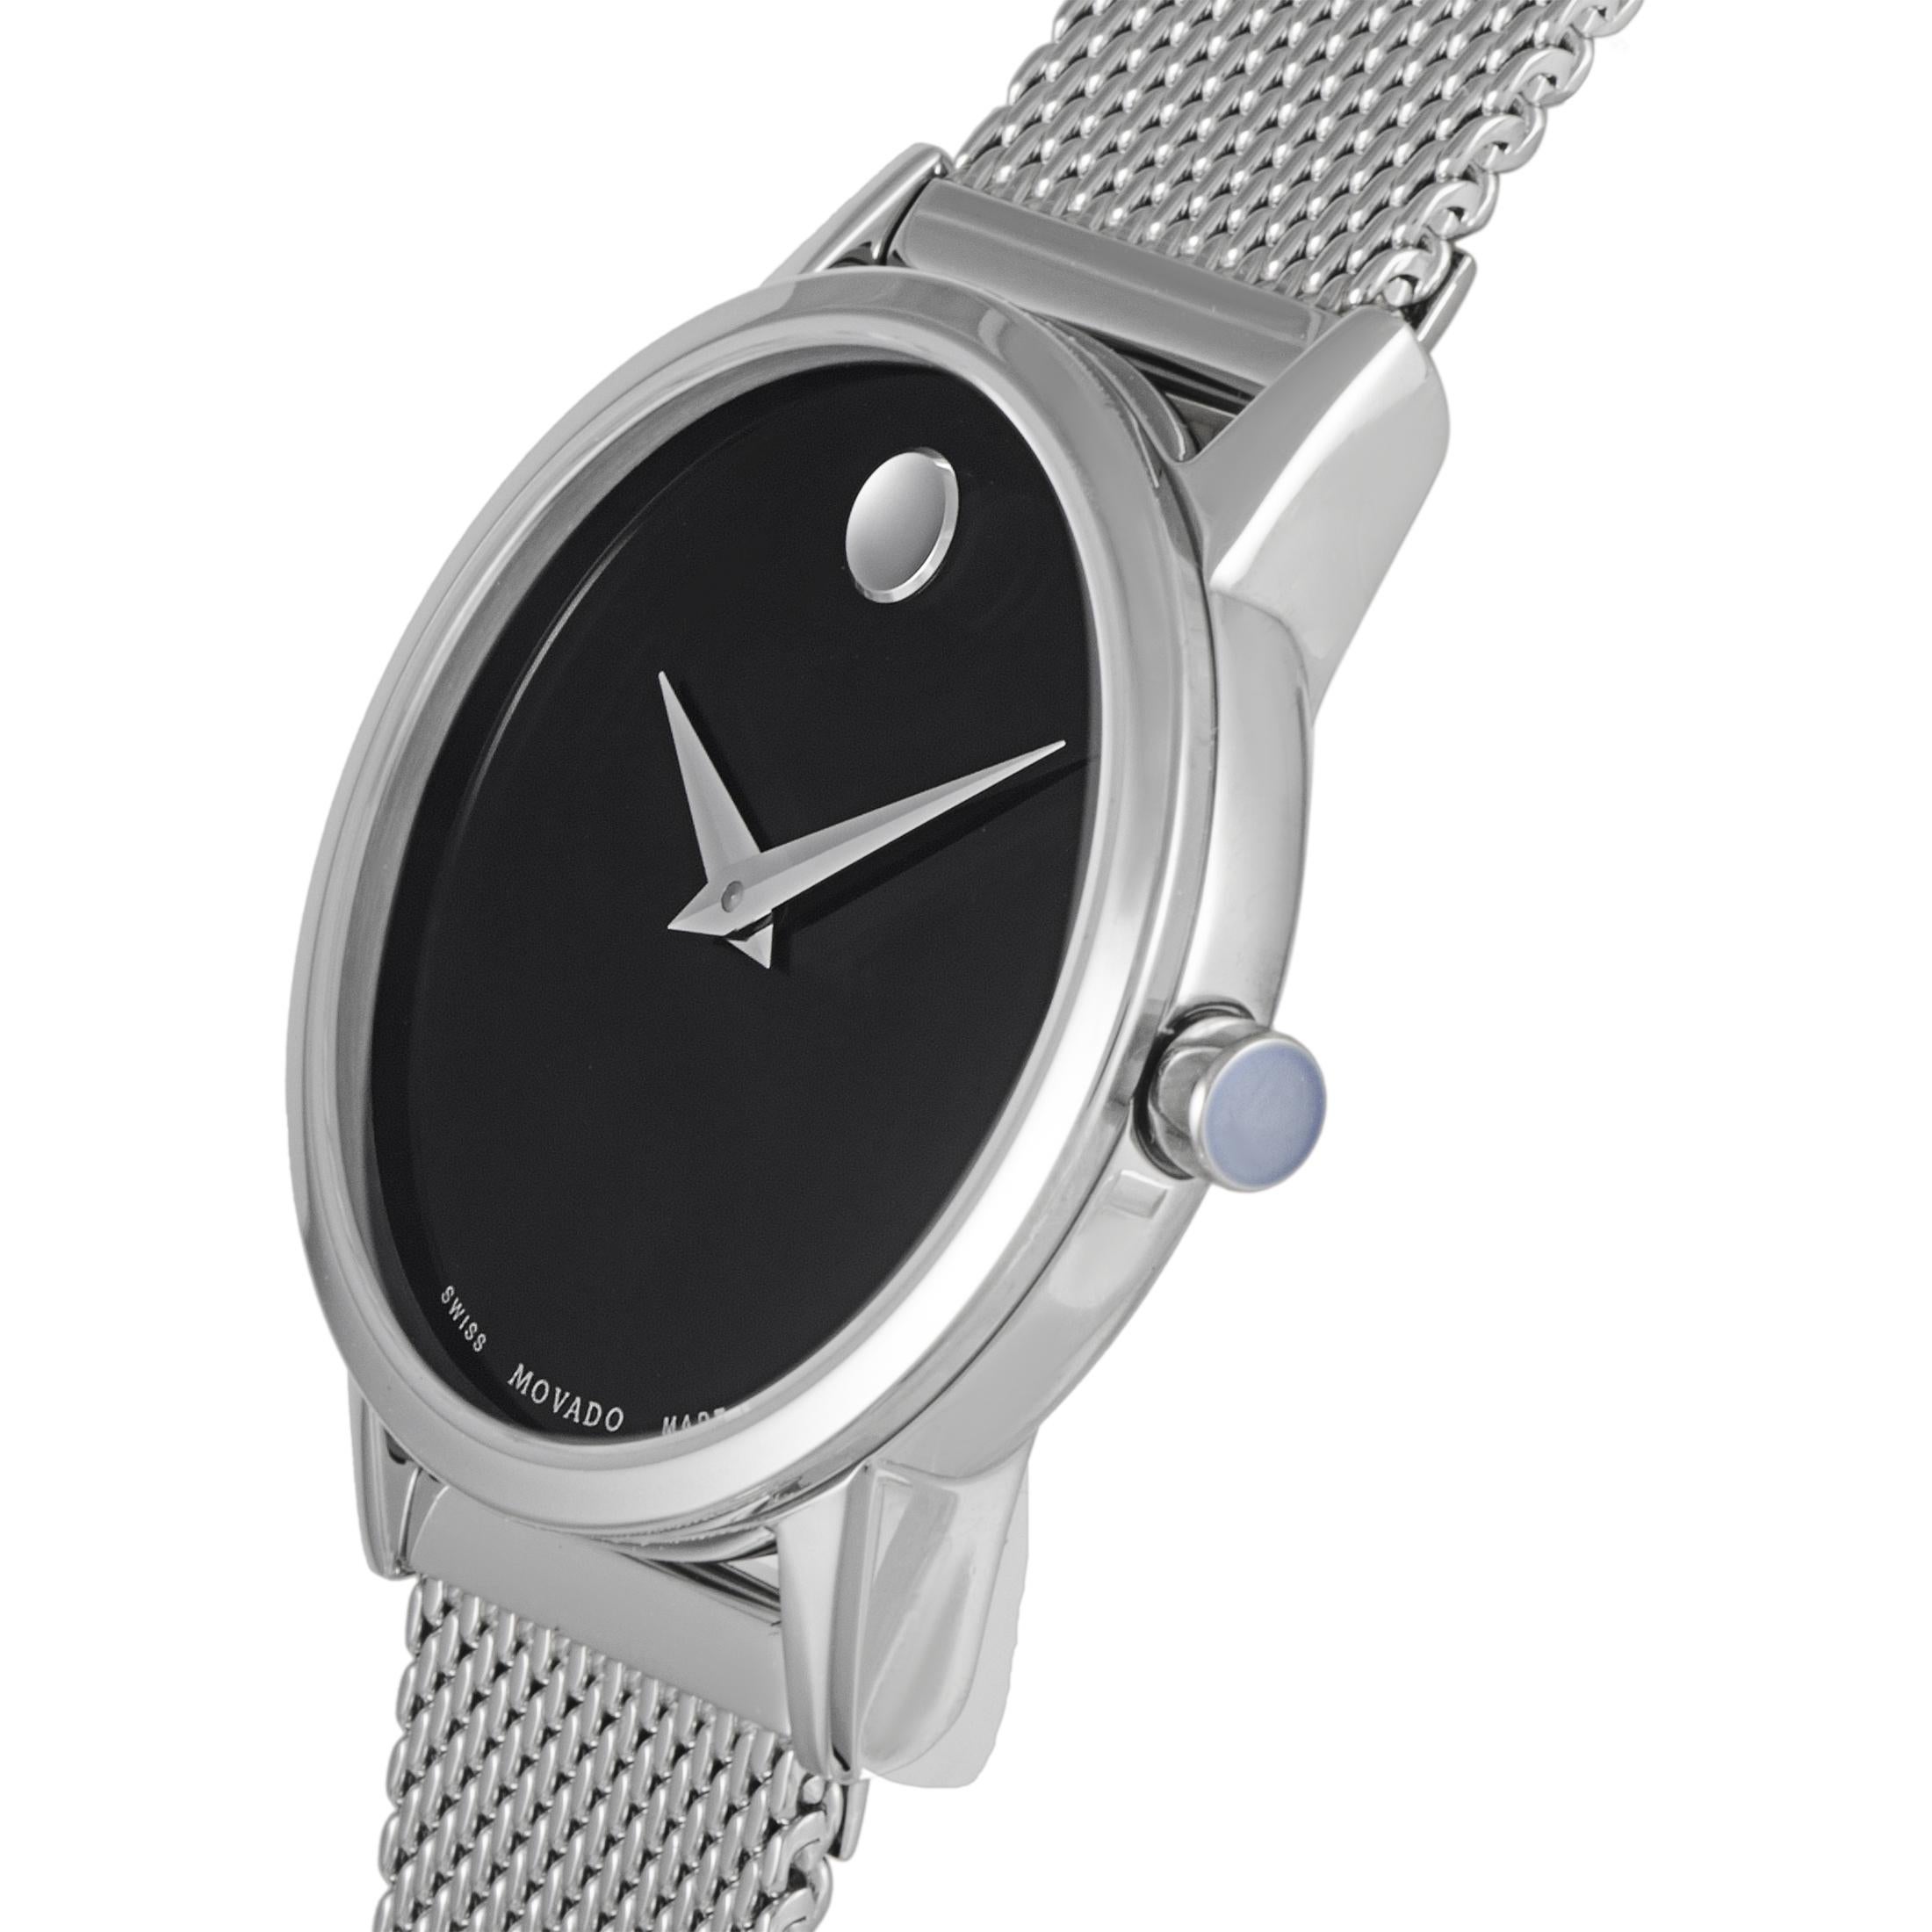 The Movado Museum Classic watch, reference number 0607220, is a member of the esteemed “Museum Classic” collection.

This timepiece is presented with a stainless steel case that measures 28 mm in diameter. The watch is powered by a quartz movement